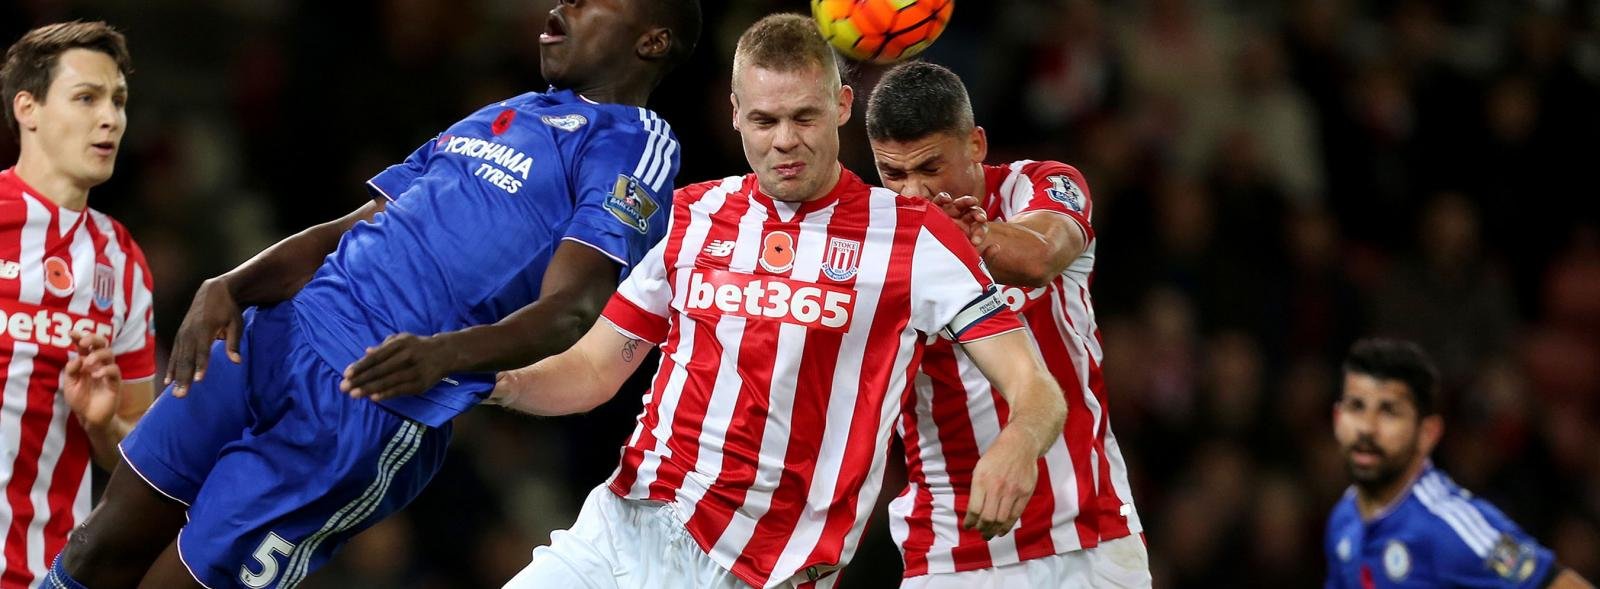 Shawcross, Whelan & Walters are just as important as the big-name Stoke signings